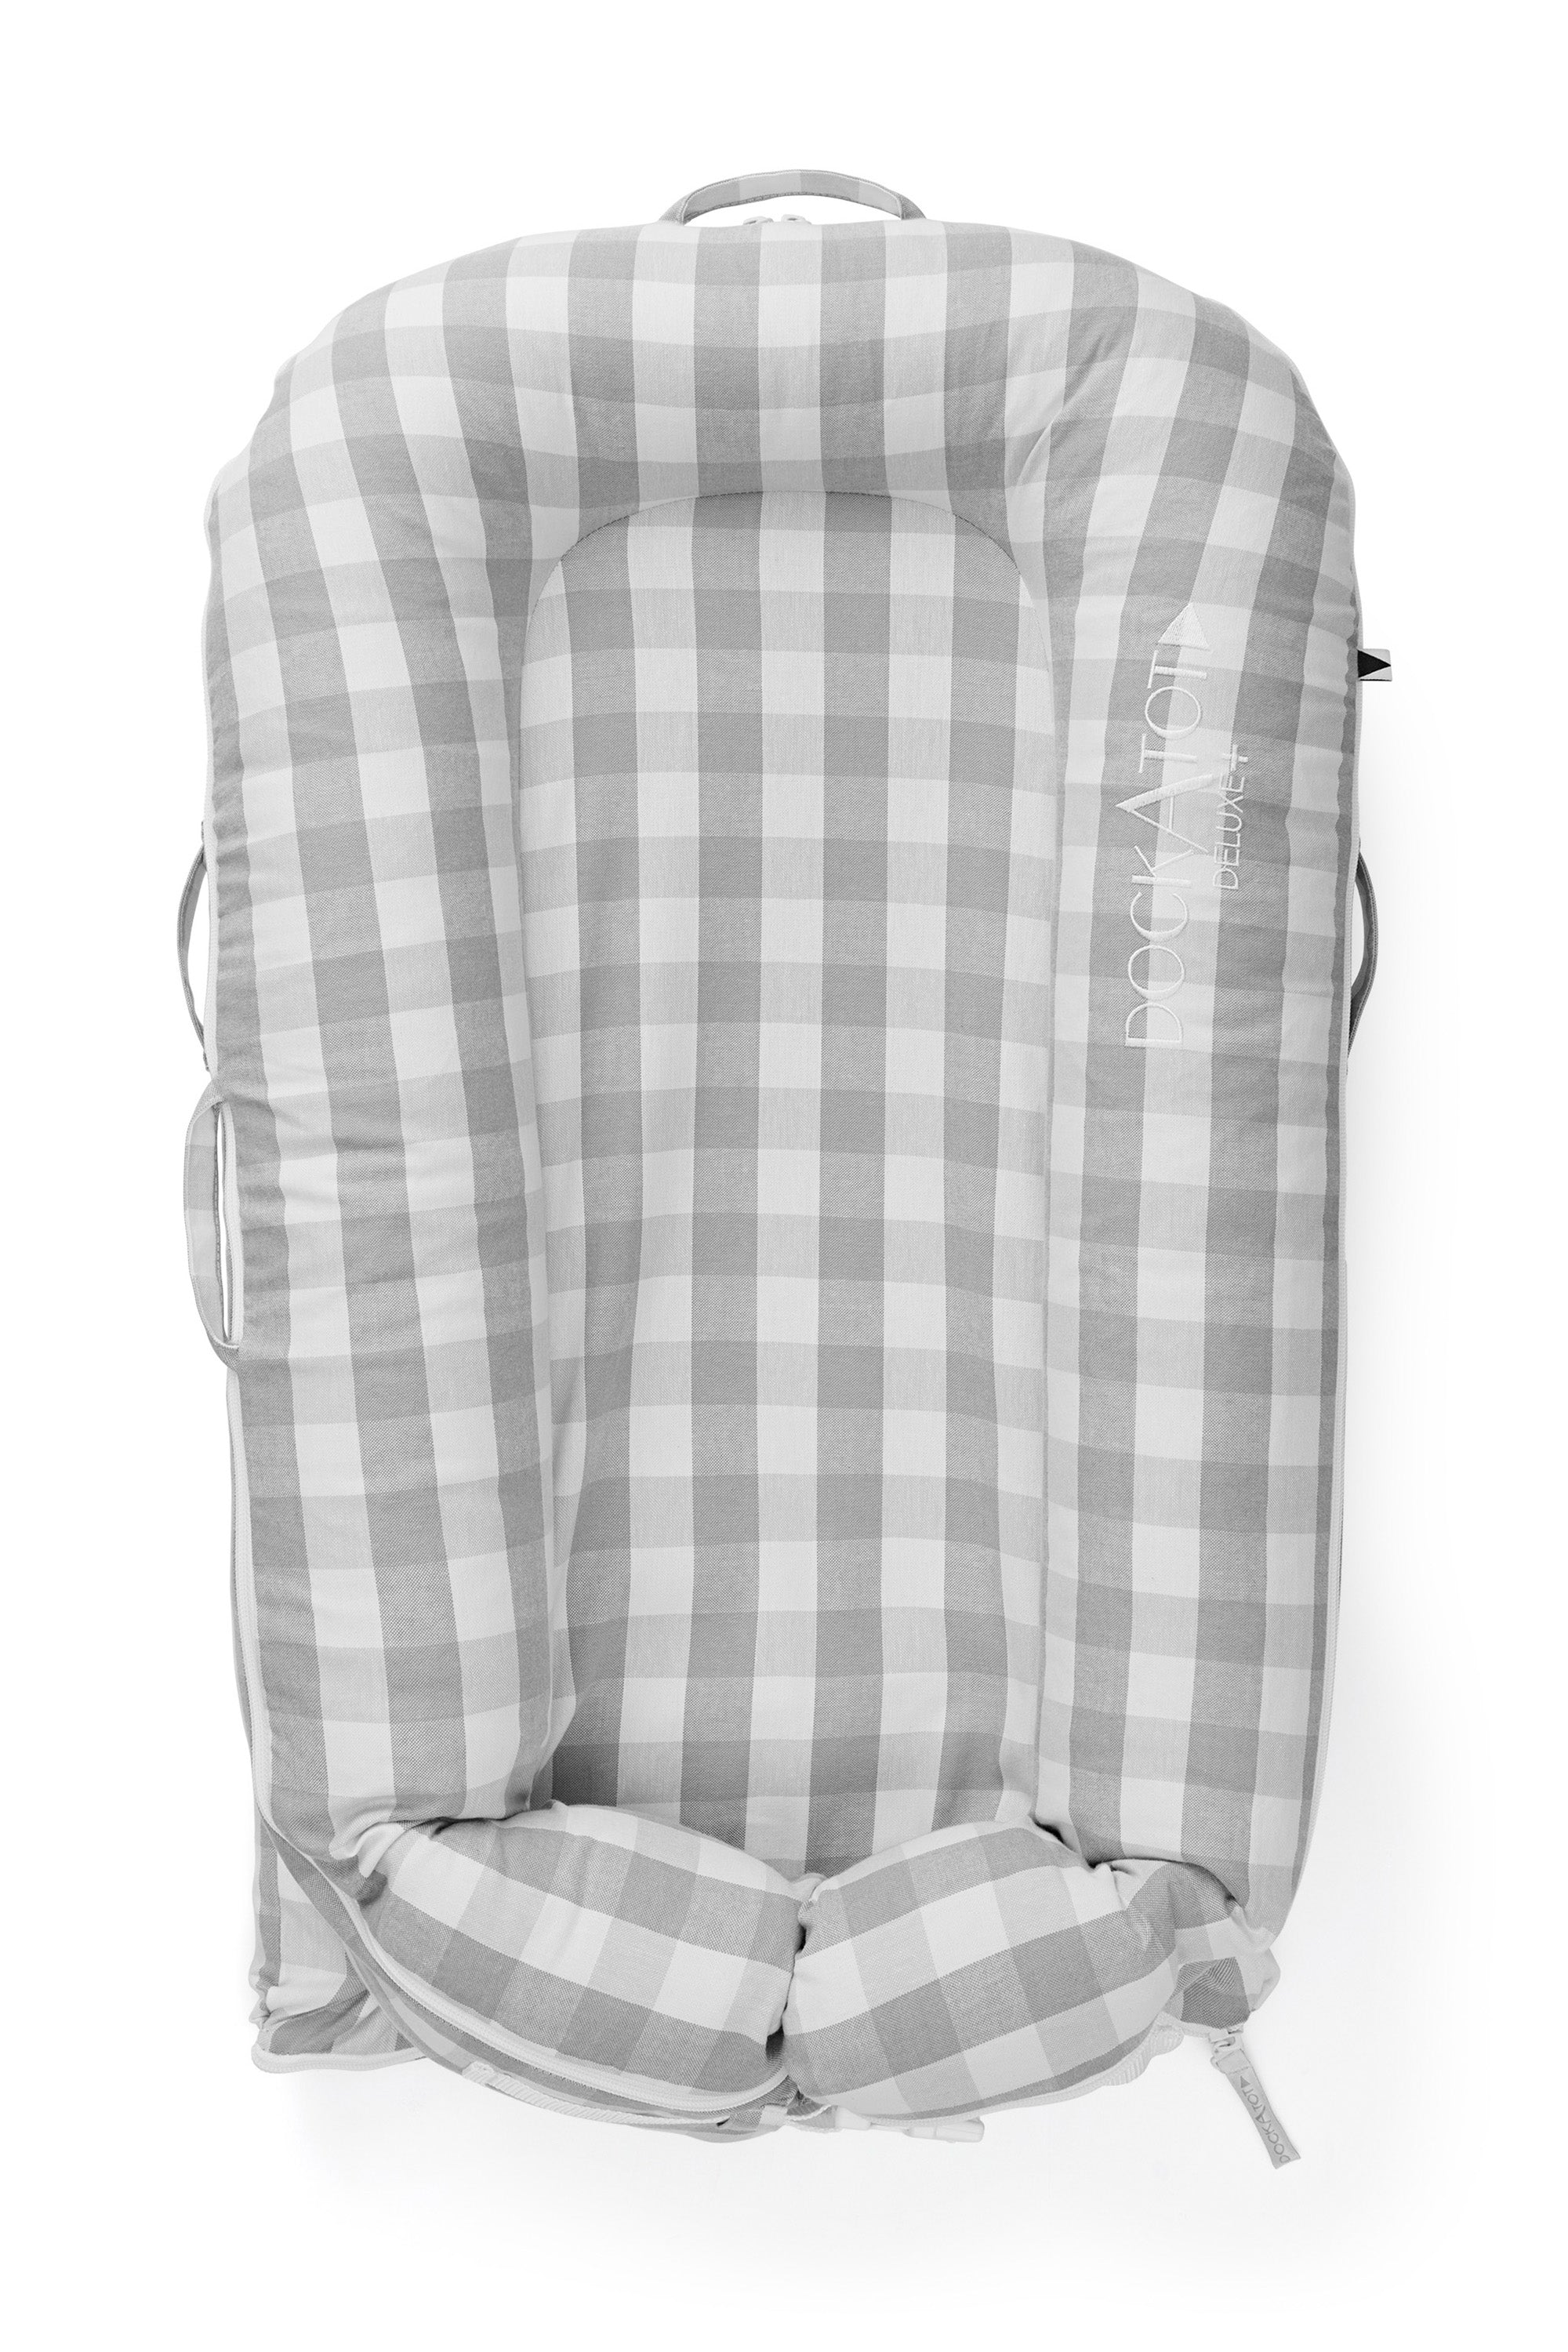 DockATot Deluxe+ Cover Only - Stone Gingham - Bubbadue